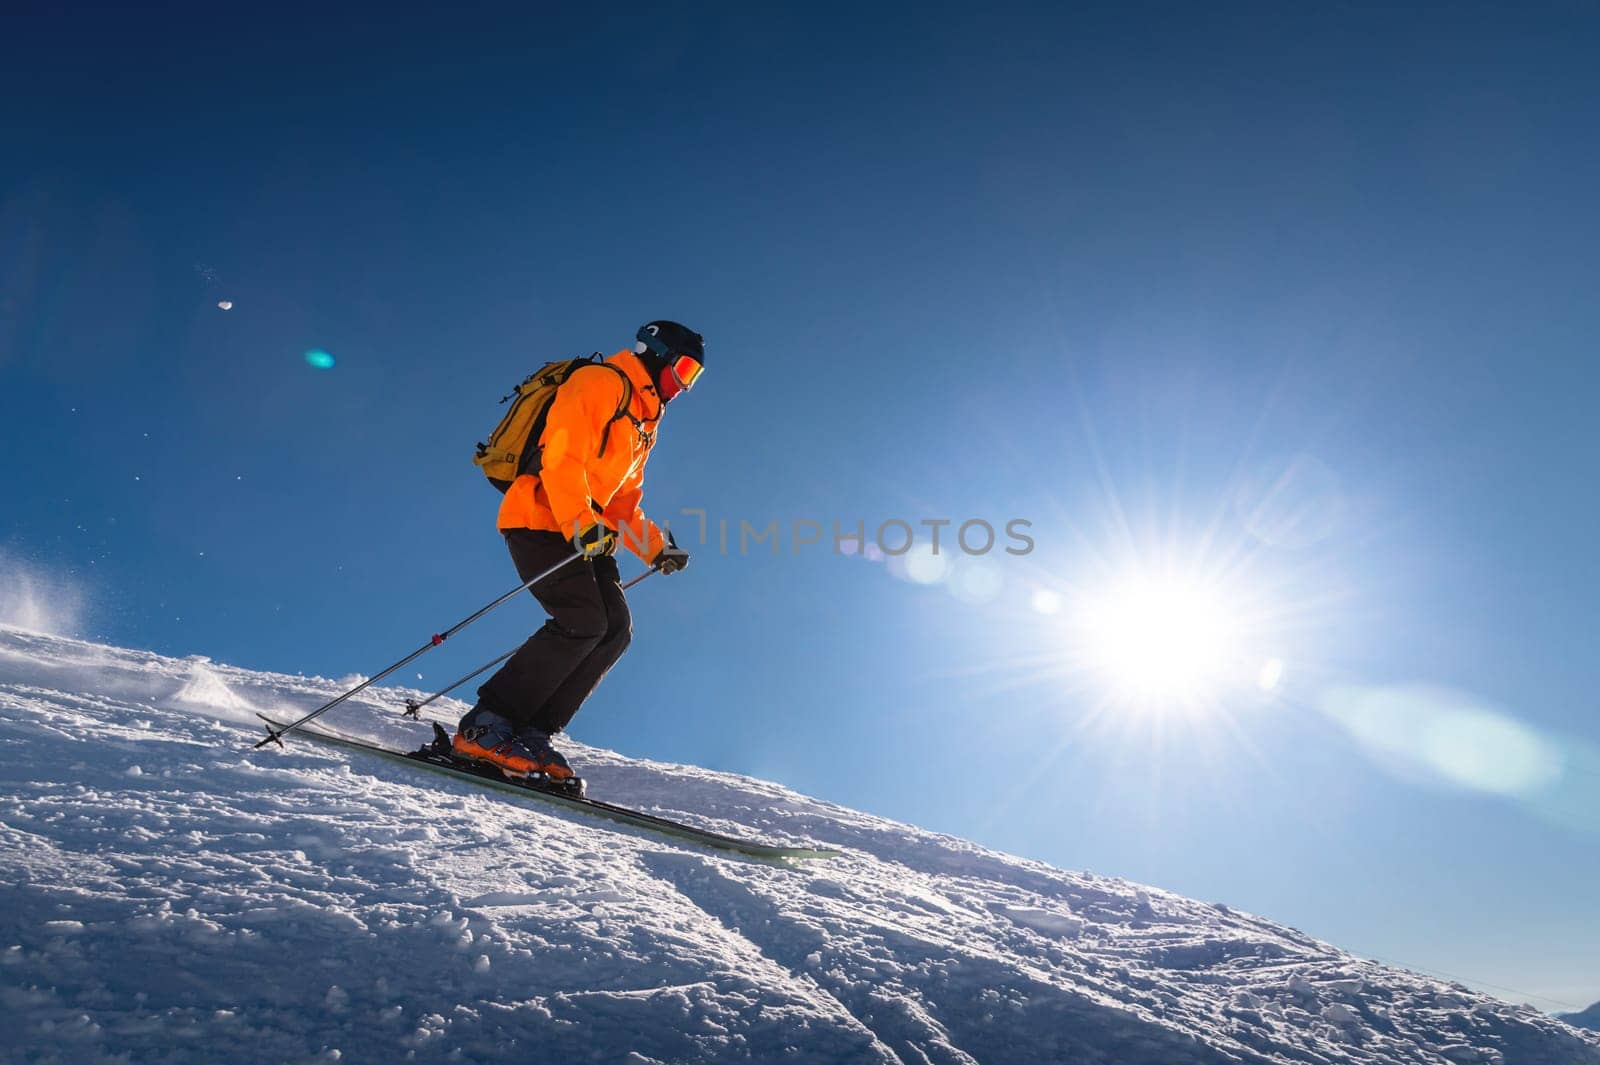 Professional skier athlete skiing at the top of a ski resort. Winter holidays and sports concept with adventure guy on the top of the mountain skiing down the slope.Warm bright sunny day by yanik88